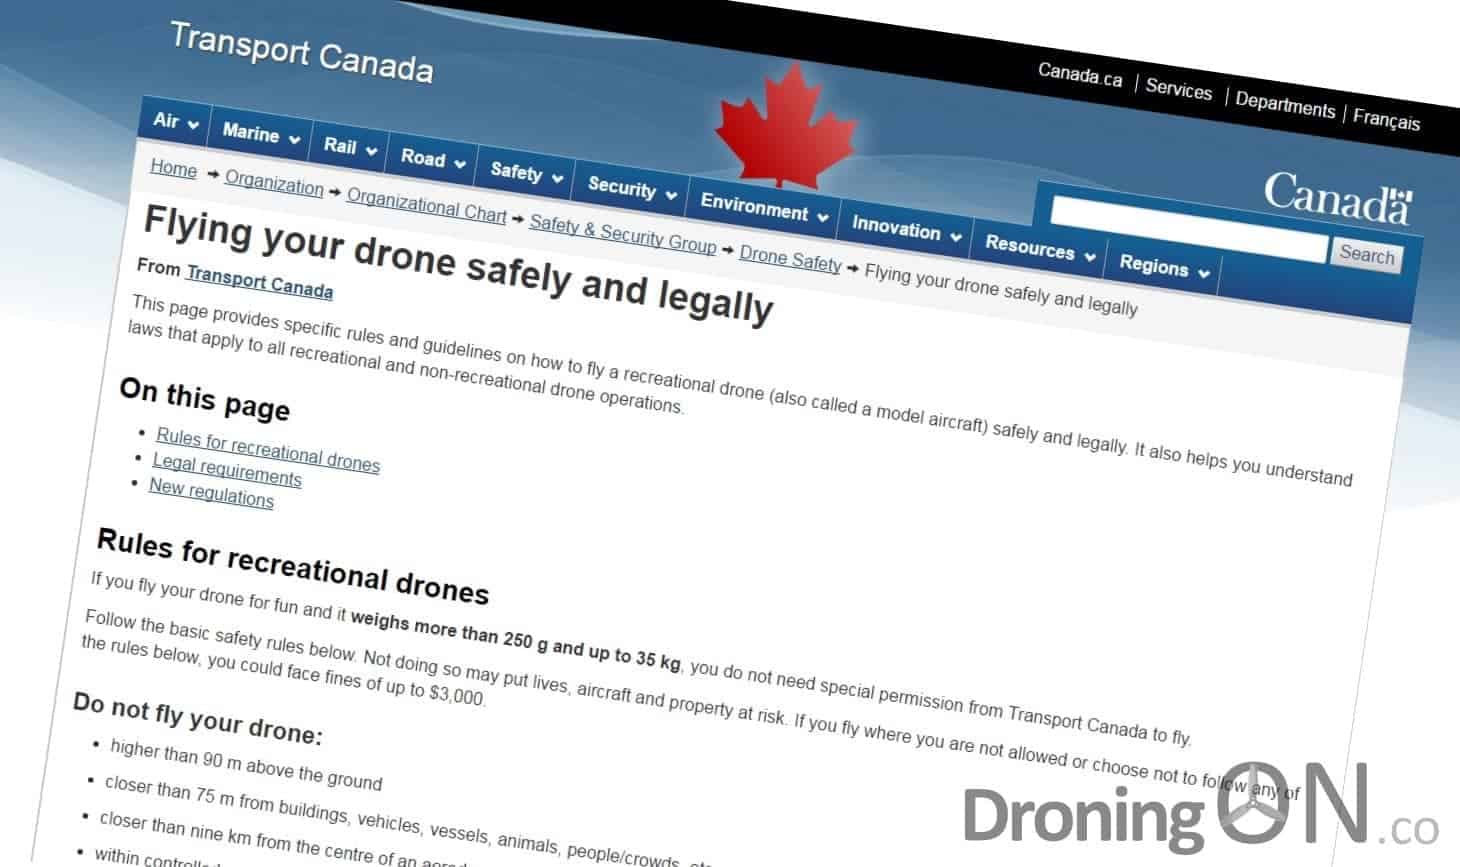 Transport Canada Introduce New Drone Regulations/Rules